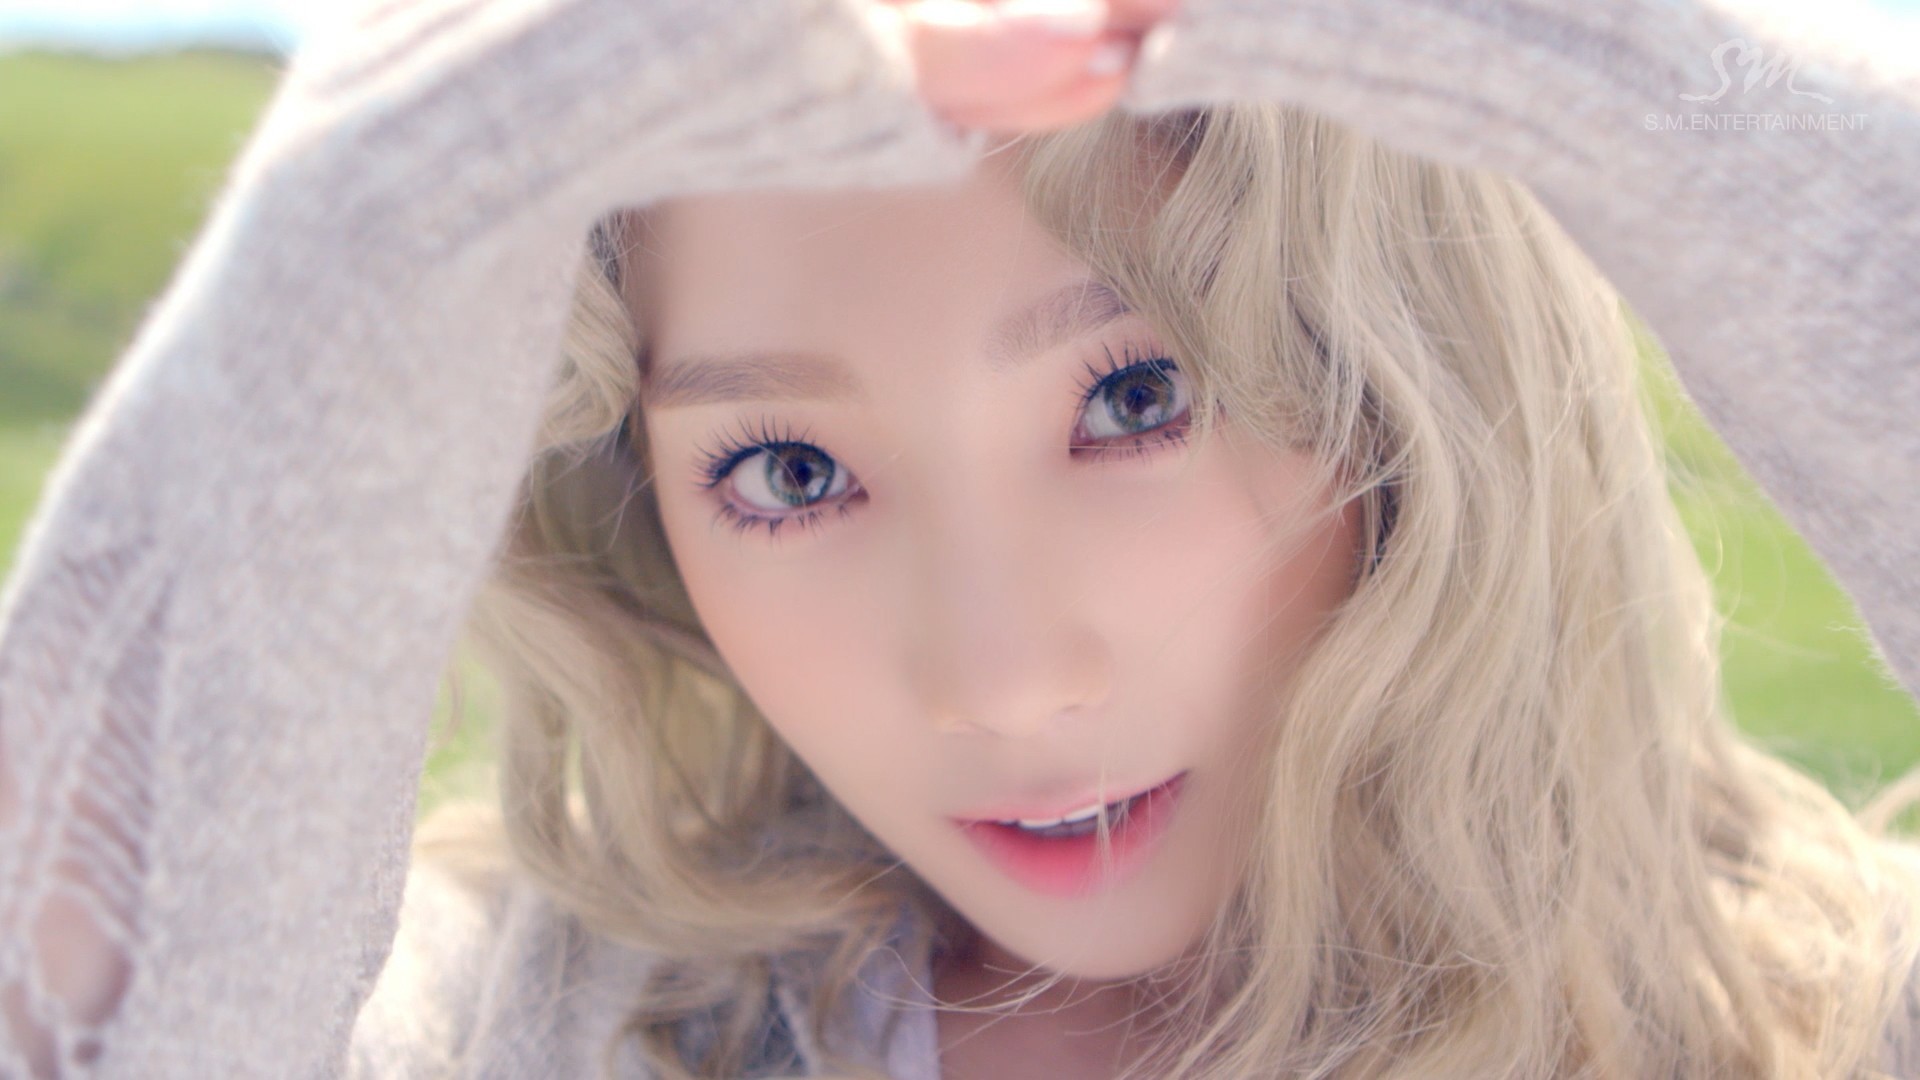 Girls Generation Taeyeon Announces First Solo Full Album this April